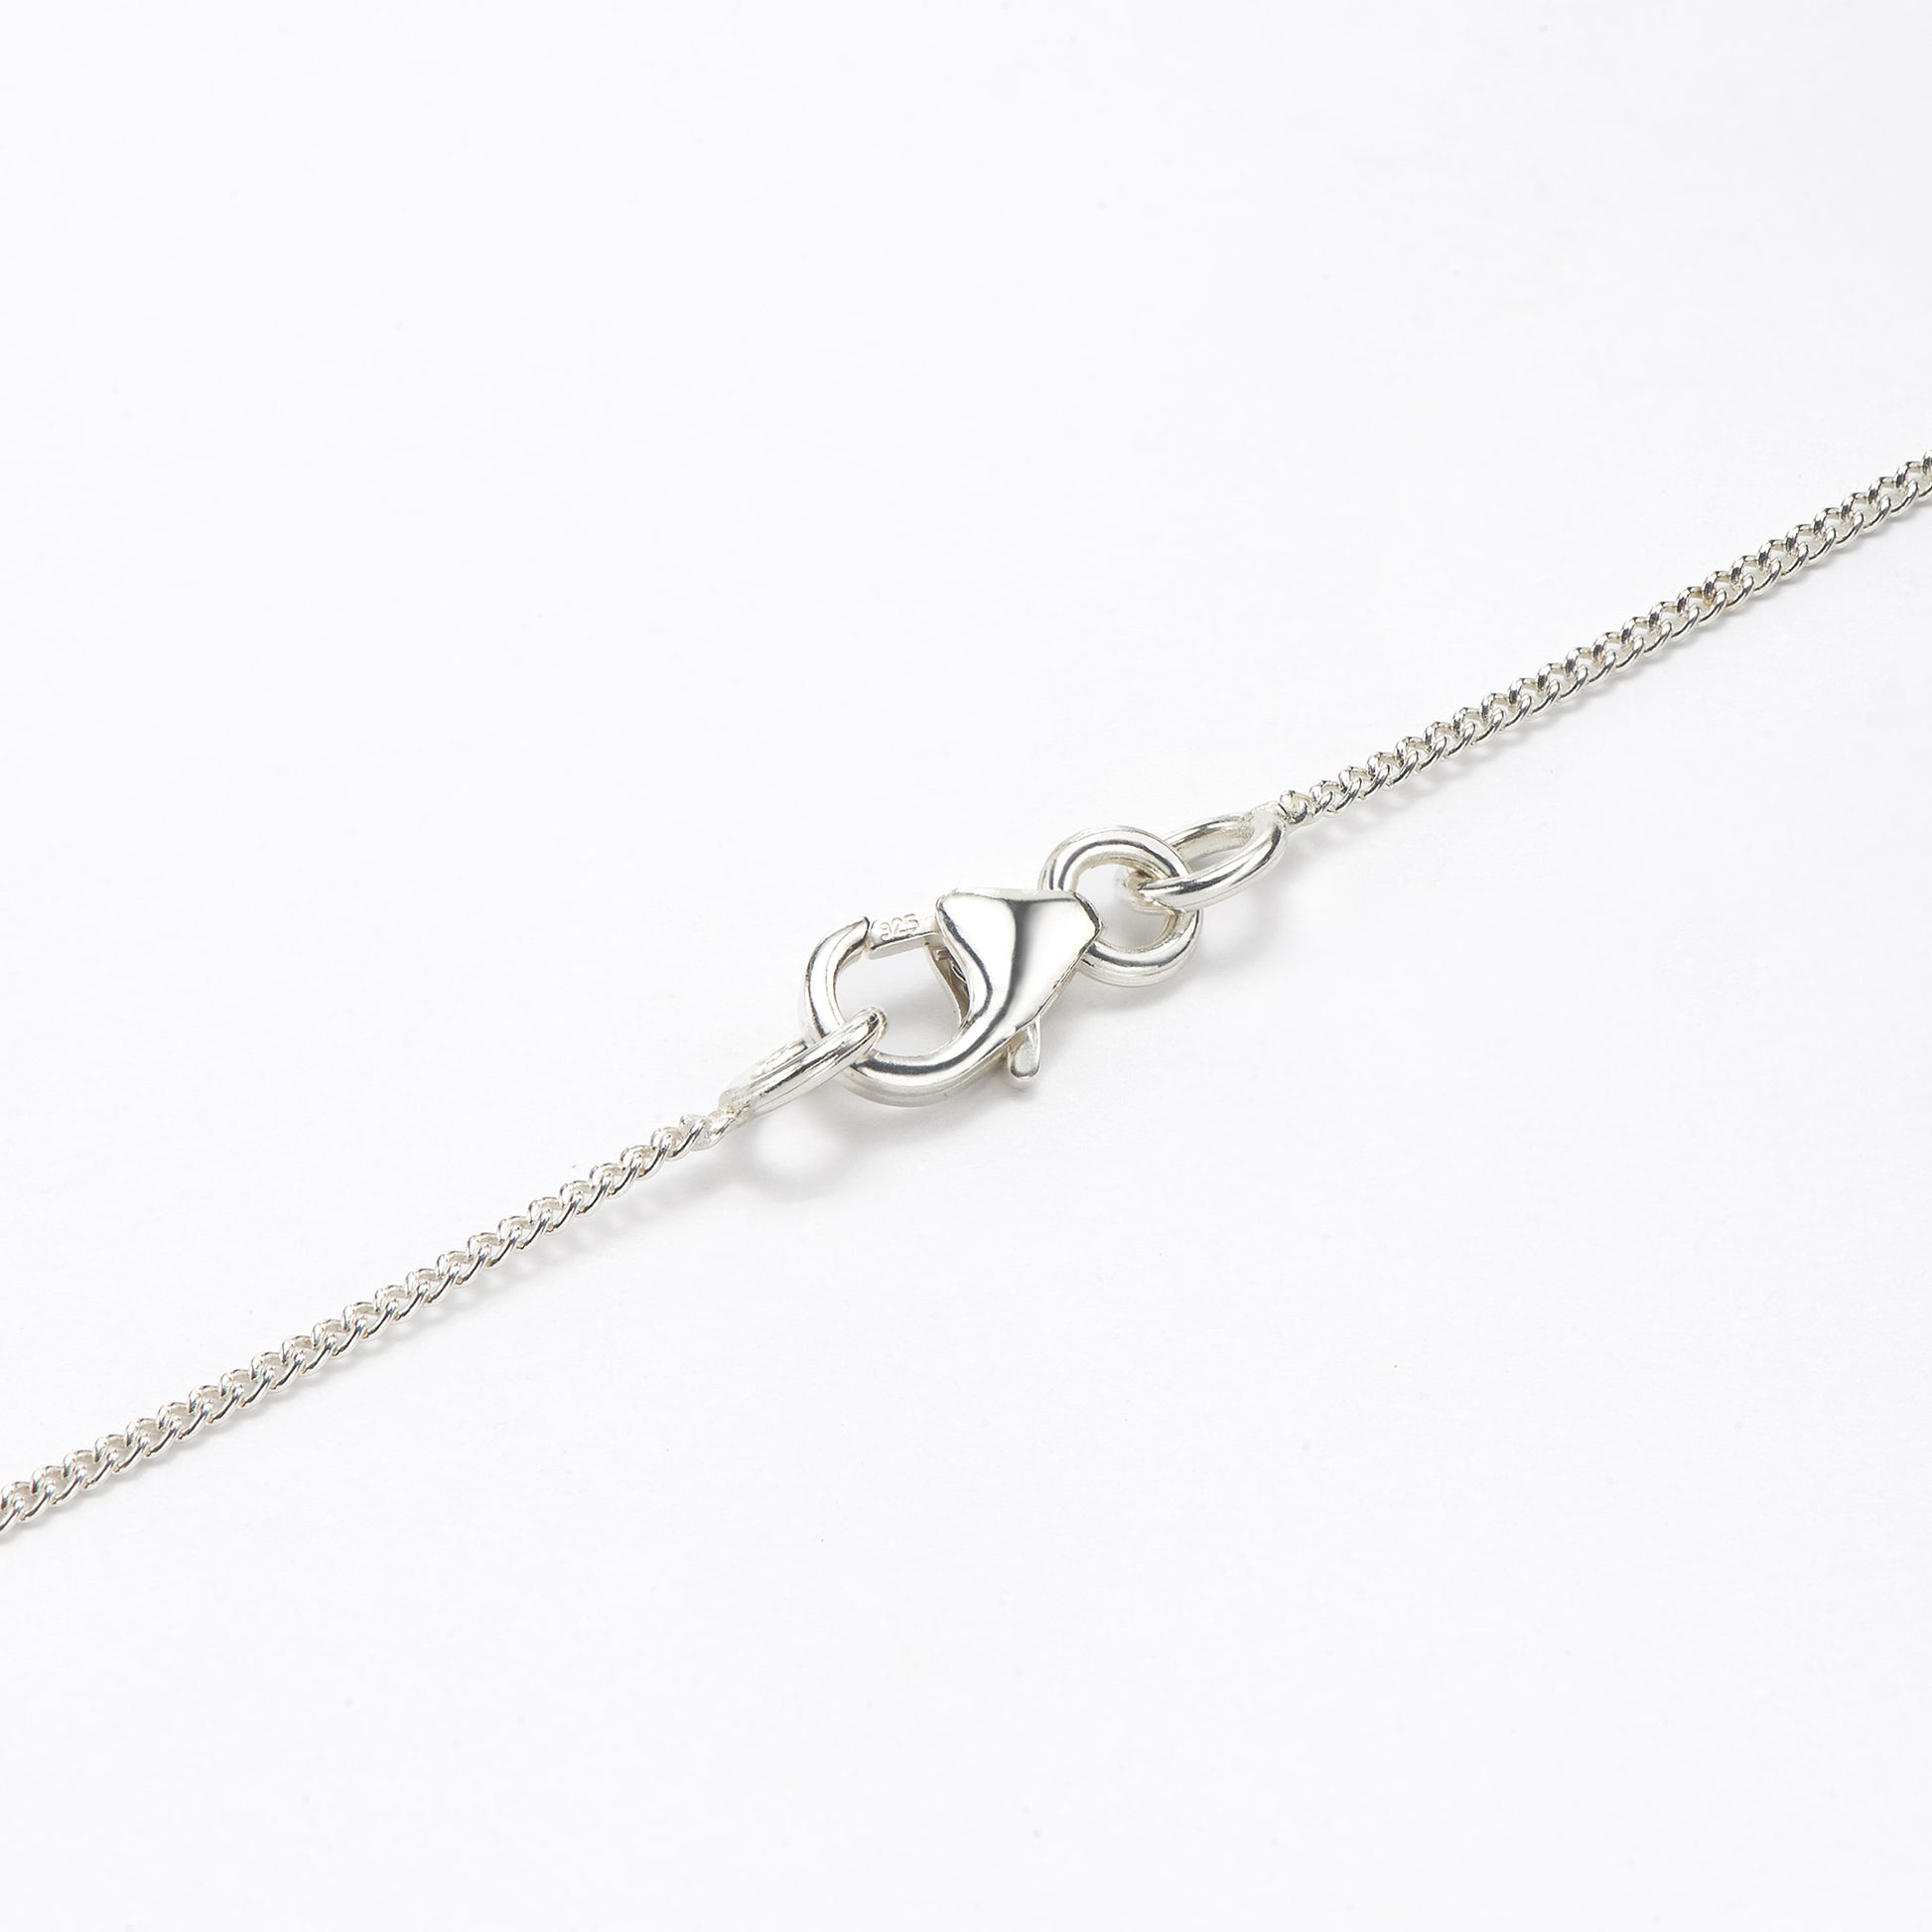 sterling silver 925 necklace clasp showing fine 0.6mm chain